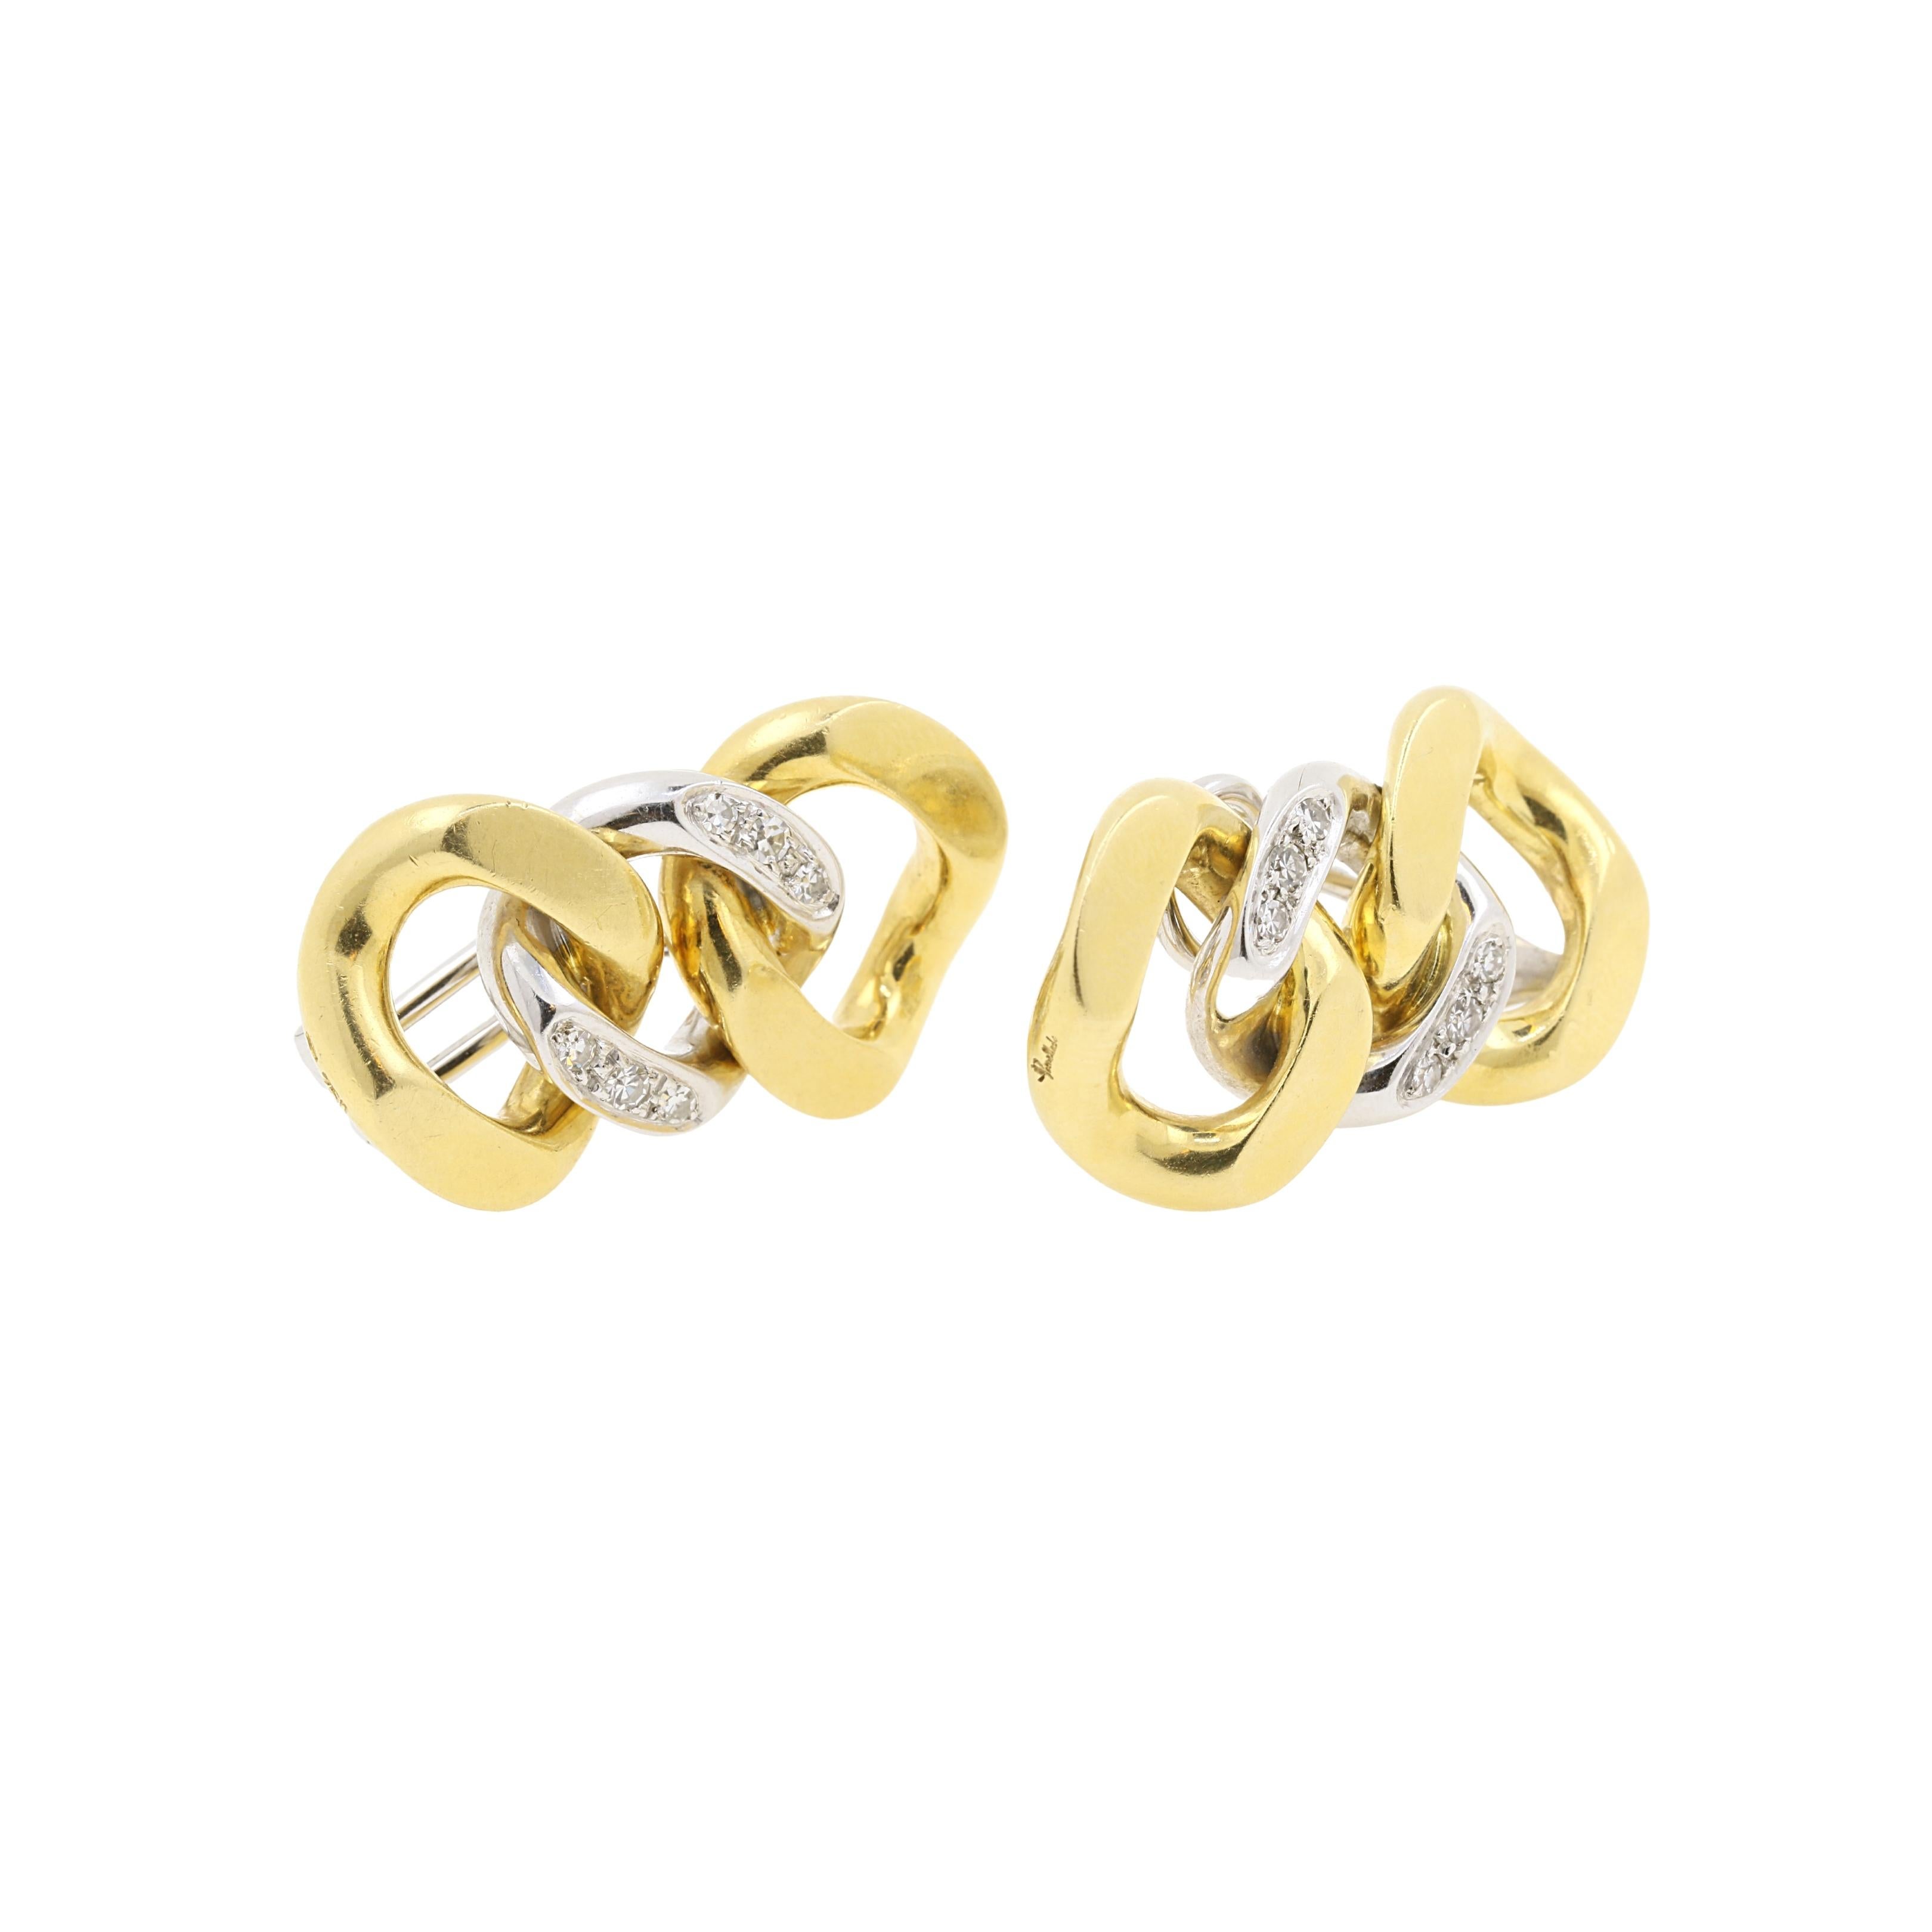 Round Cut Pomellato 18K Yellow and White Gold Earrings with Diamonds 